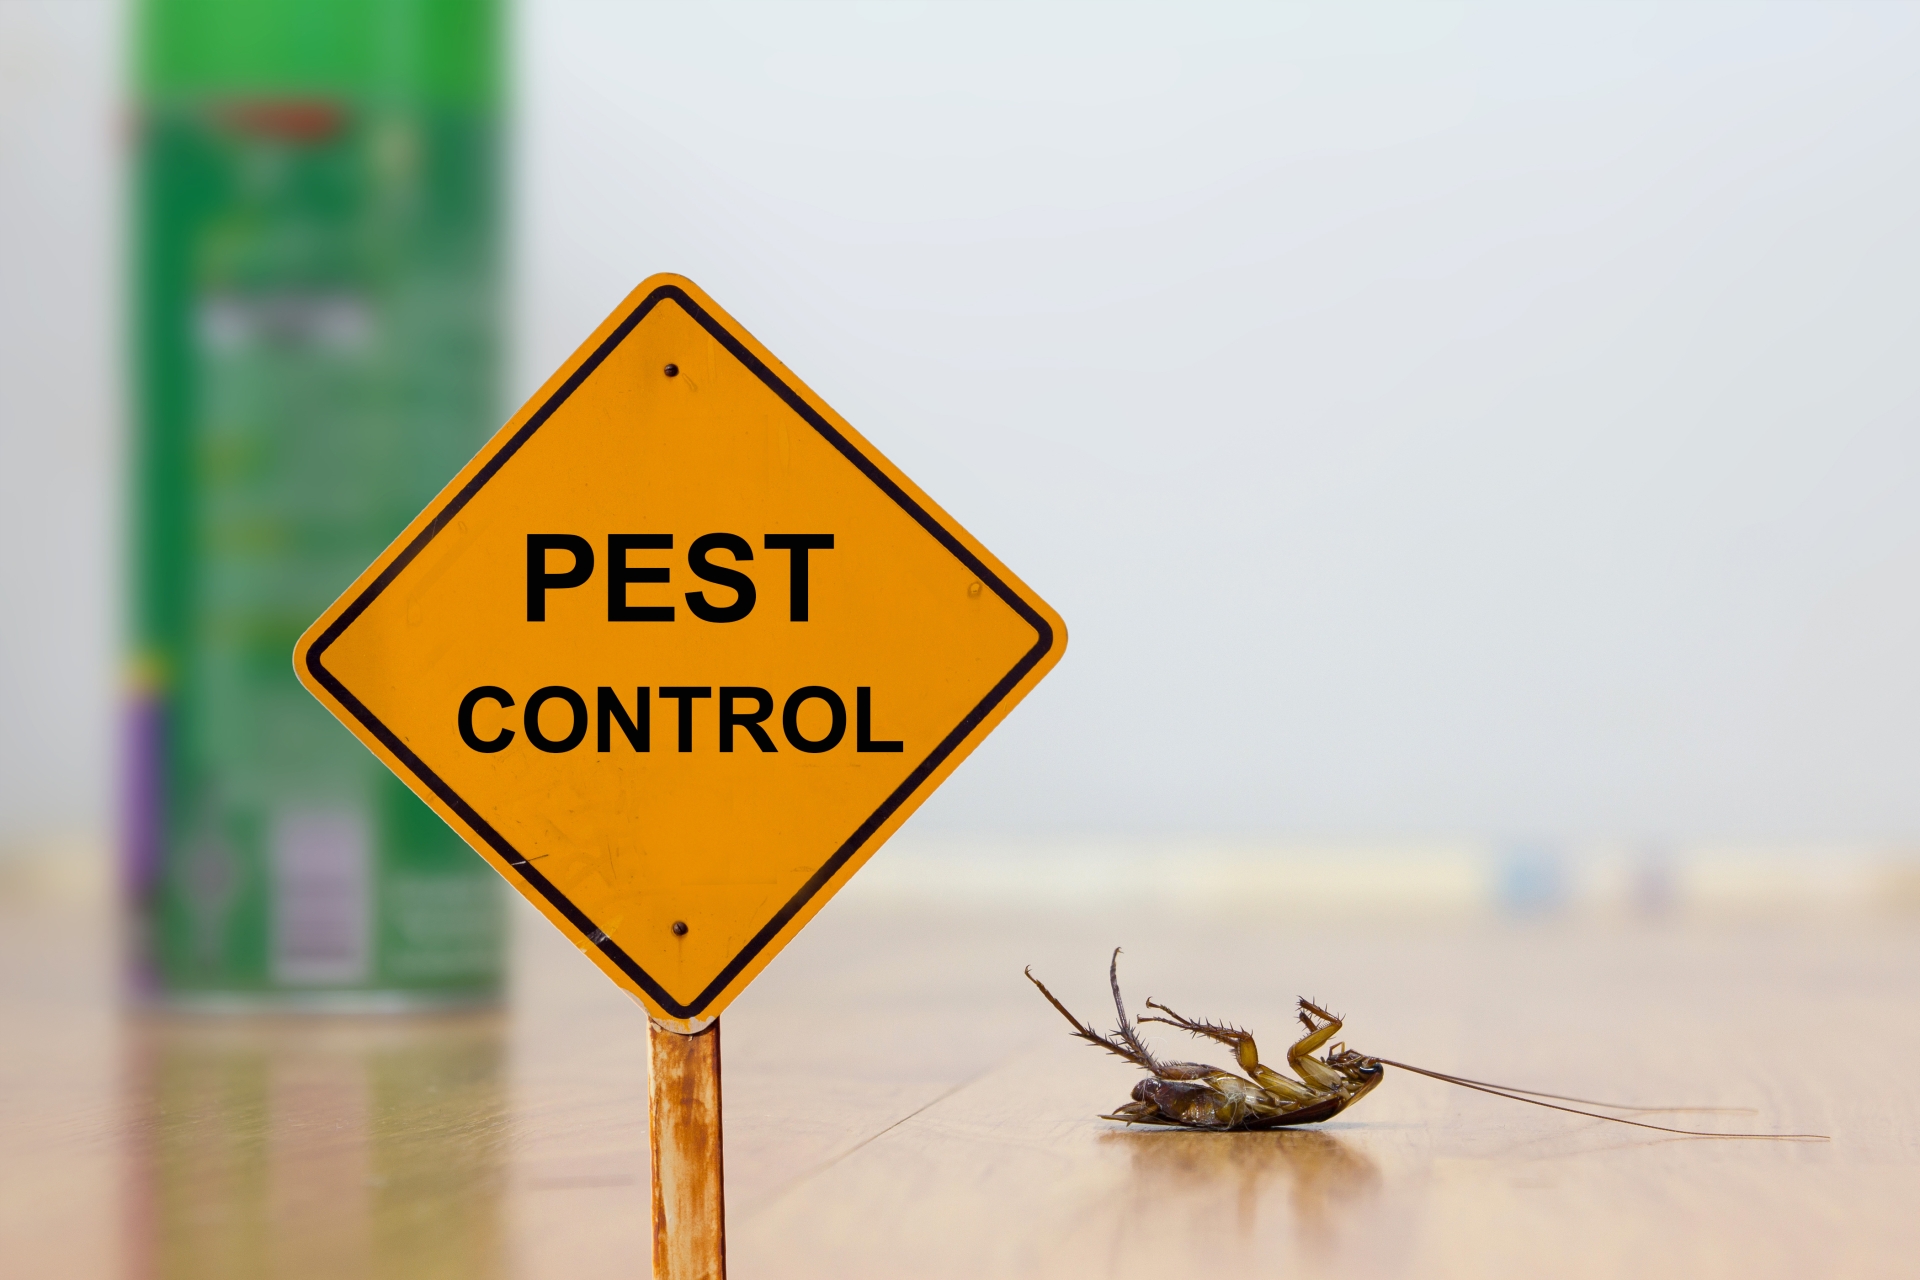 24 Hour Pest Control, Pest Control in Colindale, Kingsbury, NW9. Call Now 020 8166 9746